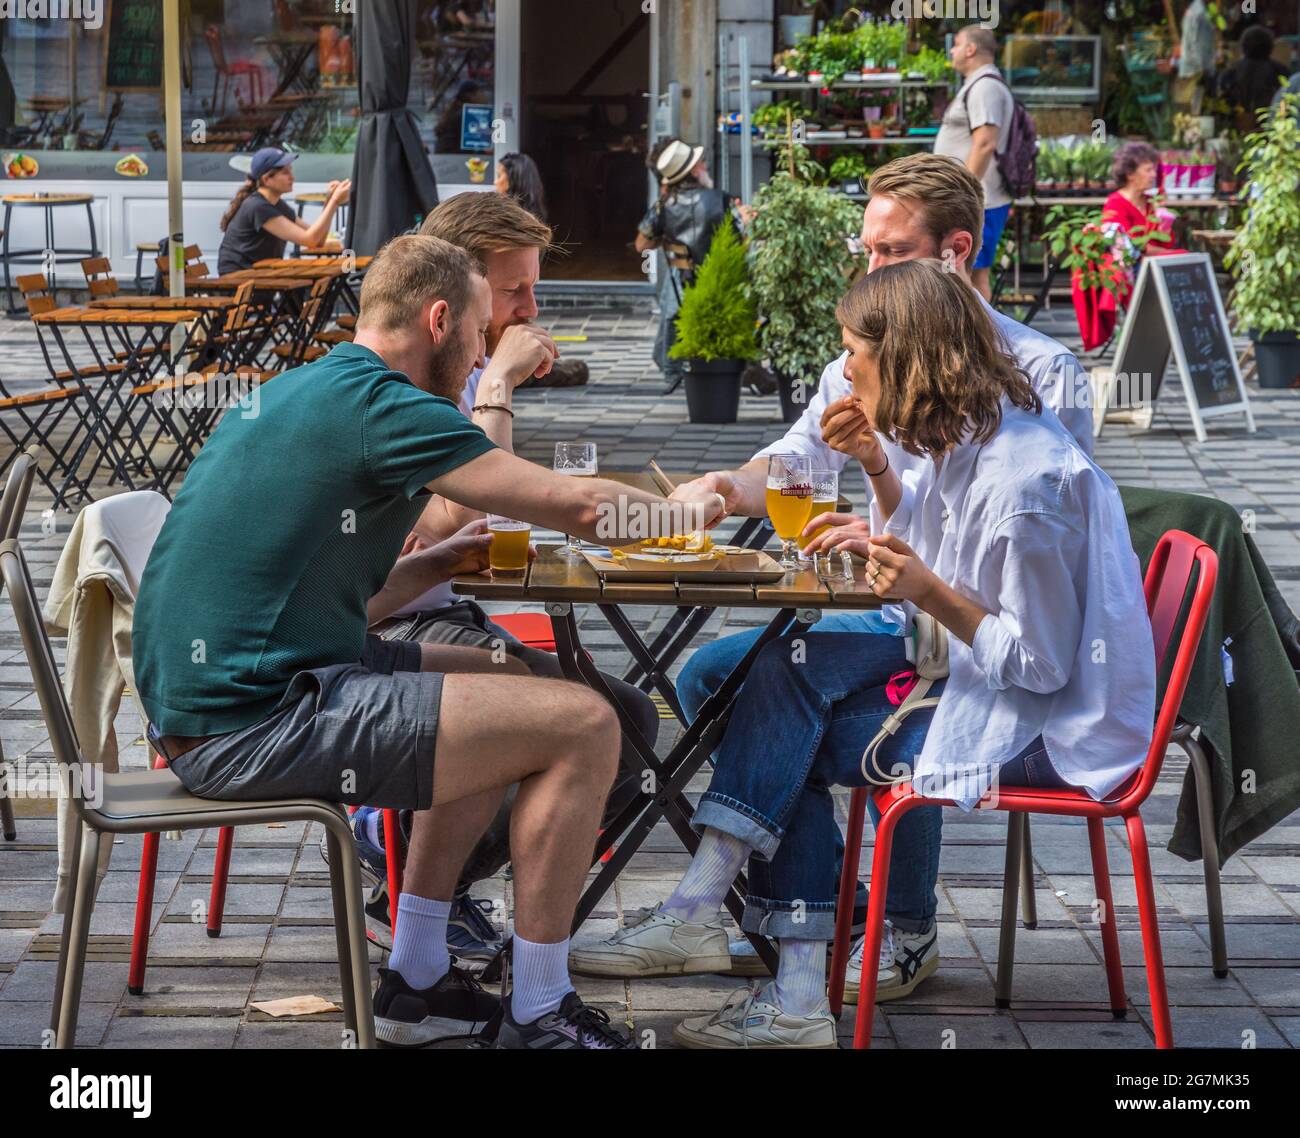 Group of friends eating chips for lunch on restaurant cafe terrace in Saint Gilles, Brussels, Belgium. Stock Photo